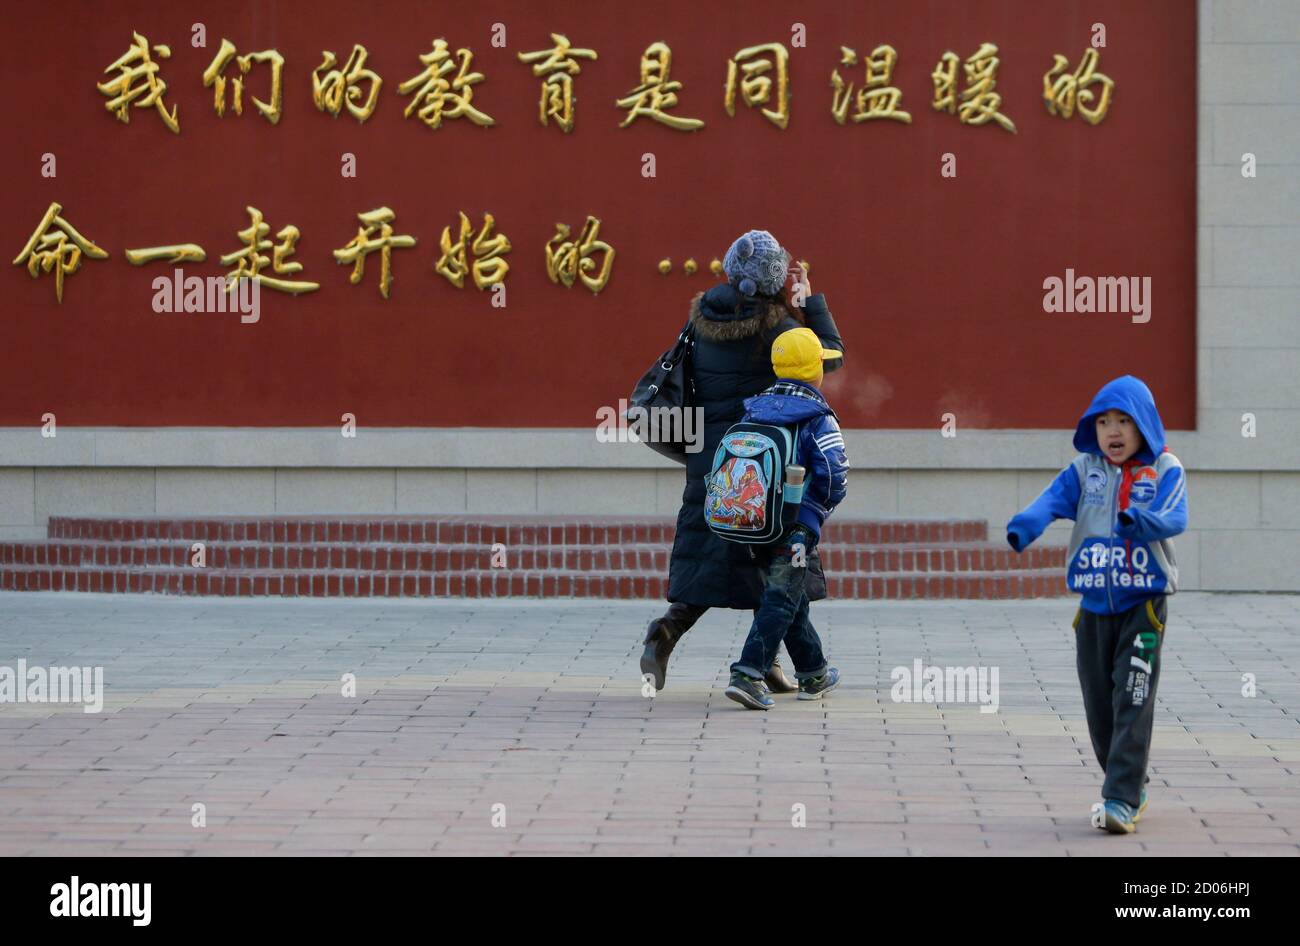 Liu Fei (L), 41-year-old warehouse worker, takes her son Xiaojie to school in Fangshan, district of Beijing, December 6, 2013. Chinese warehouse worker Liu Fei was fined 330,000 yuan ($54,200), or 14 times her yearly wage, for having a second child and her failure to pay means the boy has no access to basic rights like schooling and healthcare. Liu's desperation prompted a fruitless attempt to sell her kidney and her eight-year-old boy's plea to sell his instead. Their dilemma has now triggered a rare legal battle against the police for denying the boy a 'hukou' - household registration - due  Stock Photo